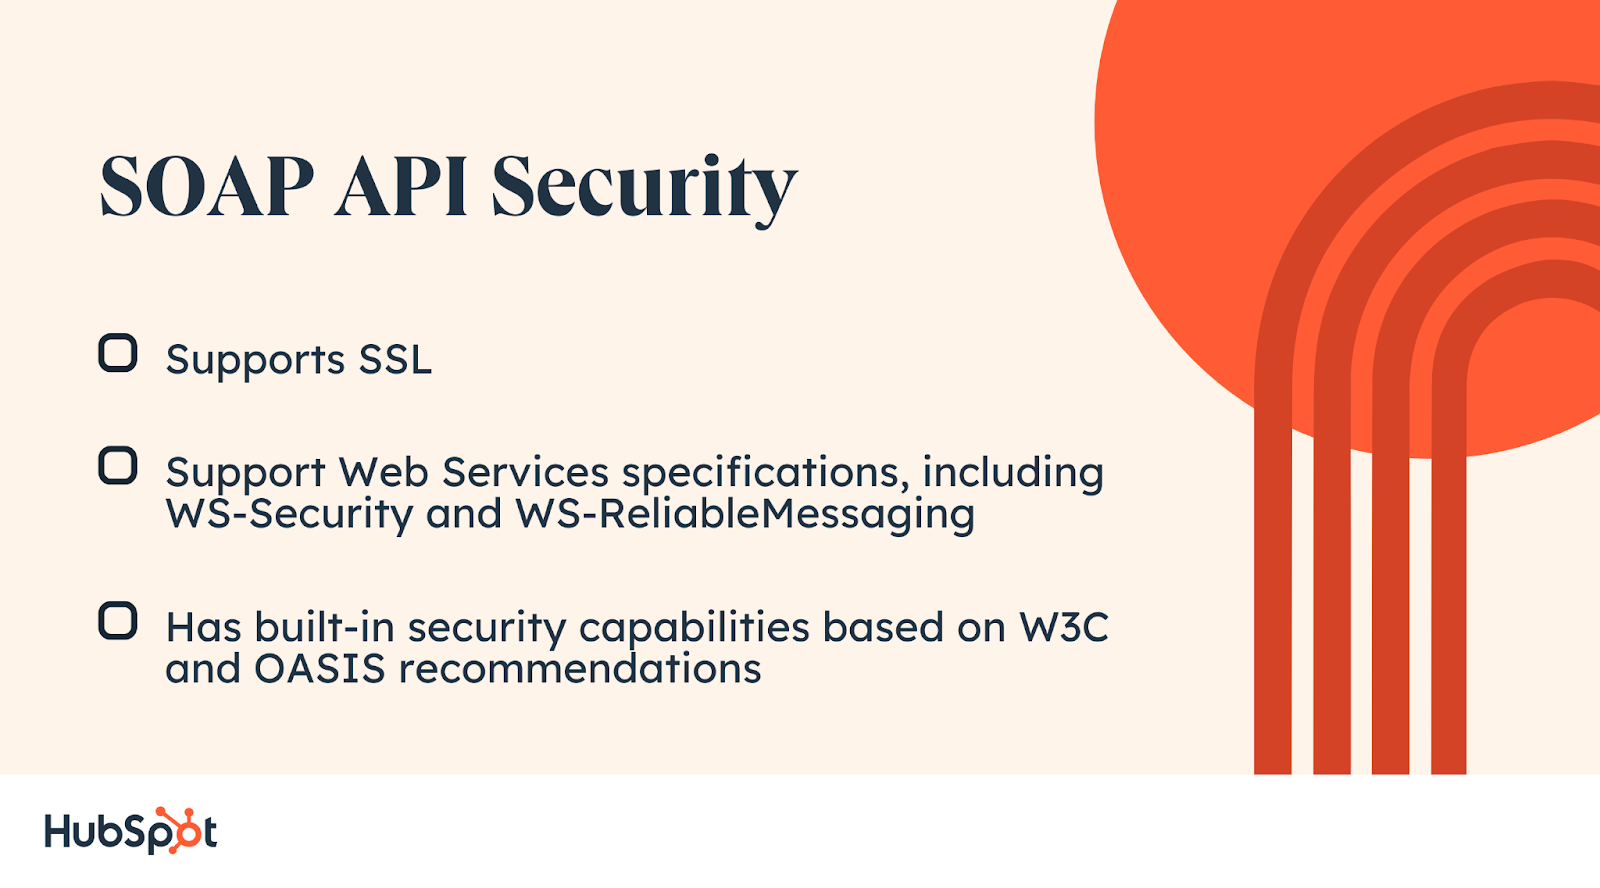 SOAP API Security. Supports SSL. Support Web Services specifications, including WS-Security and WS-reliable messaging. Has built-in security capabilities based on W3C and OASIS recommendations